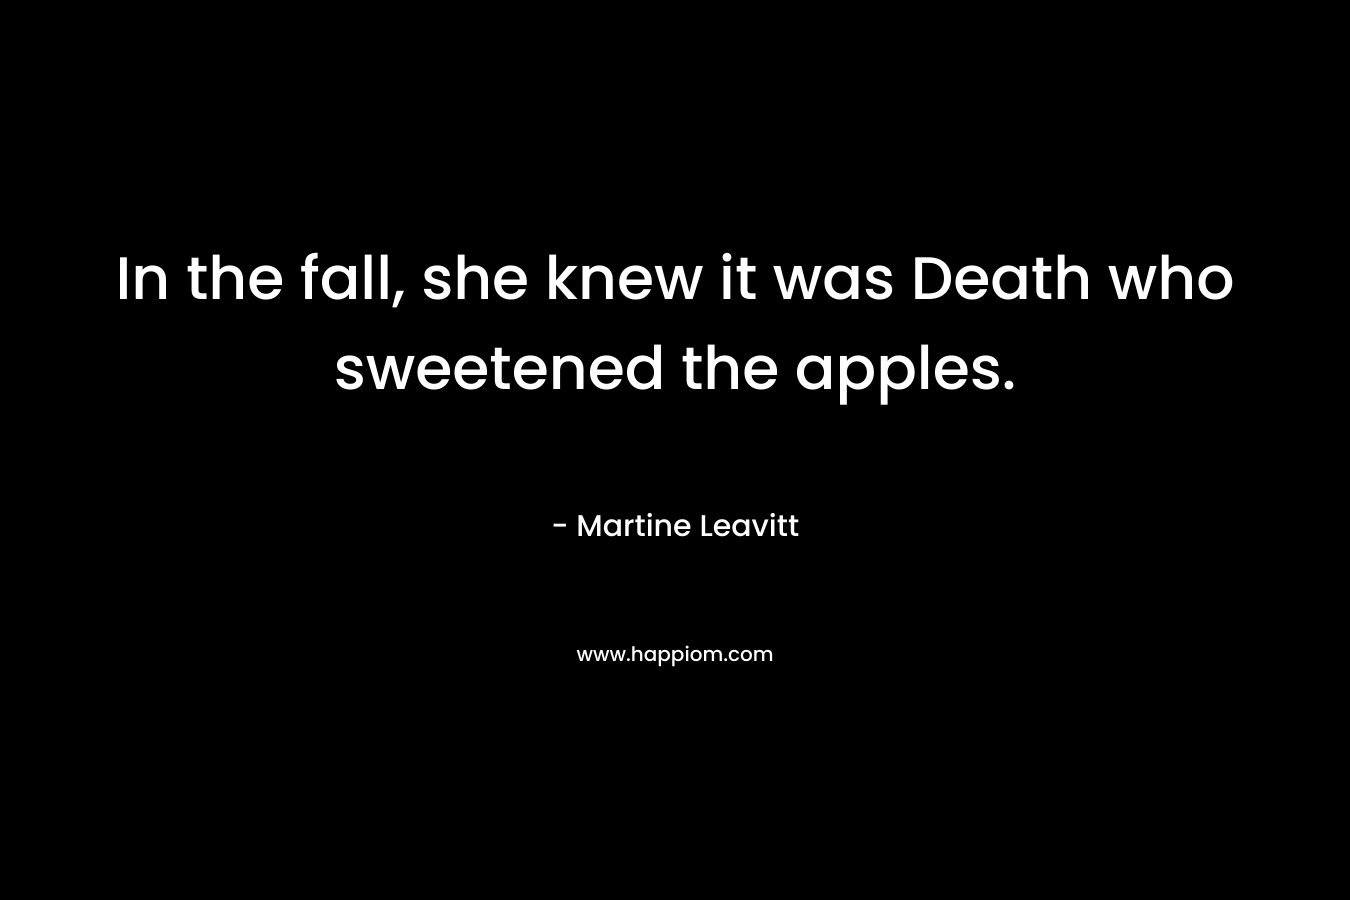 In the fall, she knew it was Death who sweetened the apples.